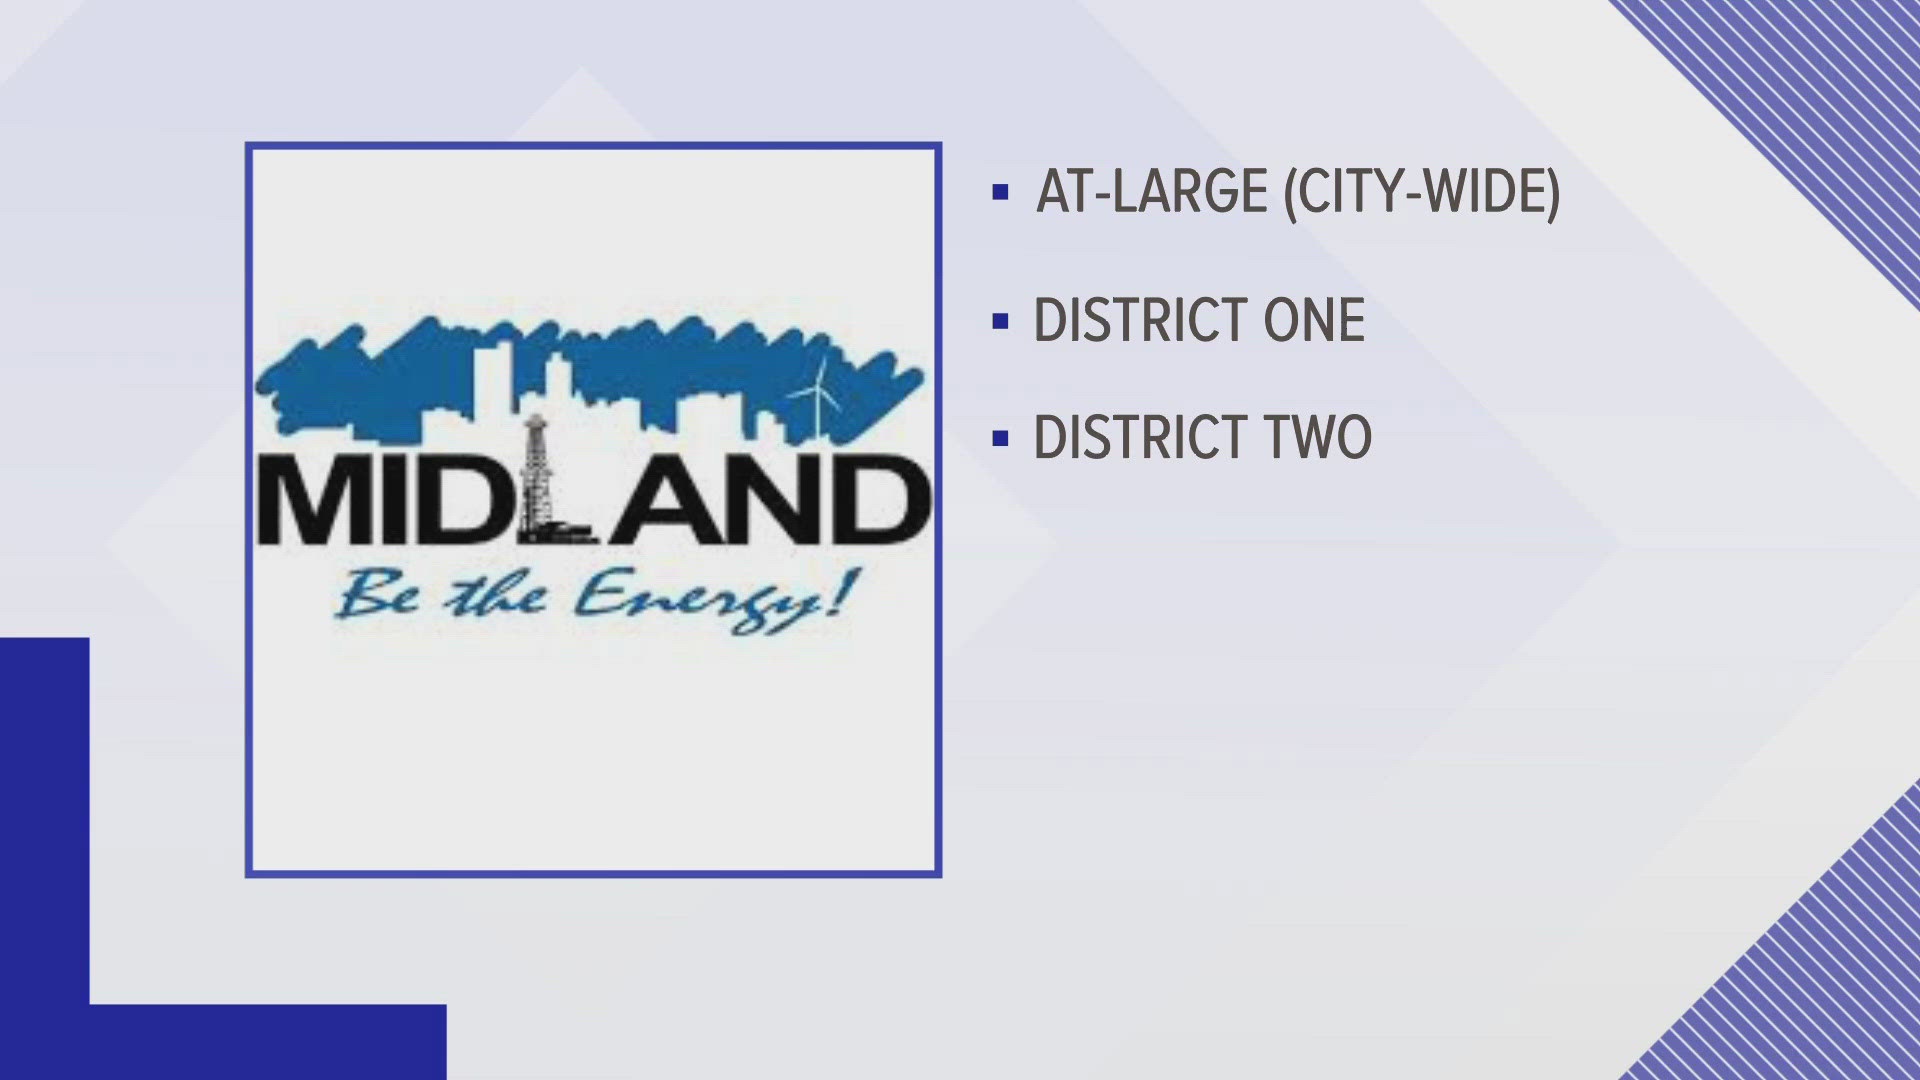 For both Midland and Odessa, the filing period will continue until 5 p.m. on Aug. 19.